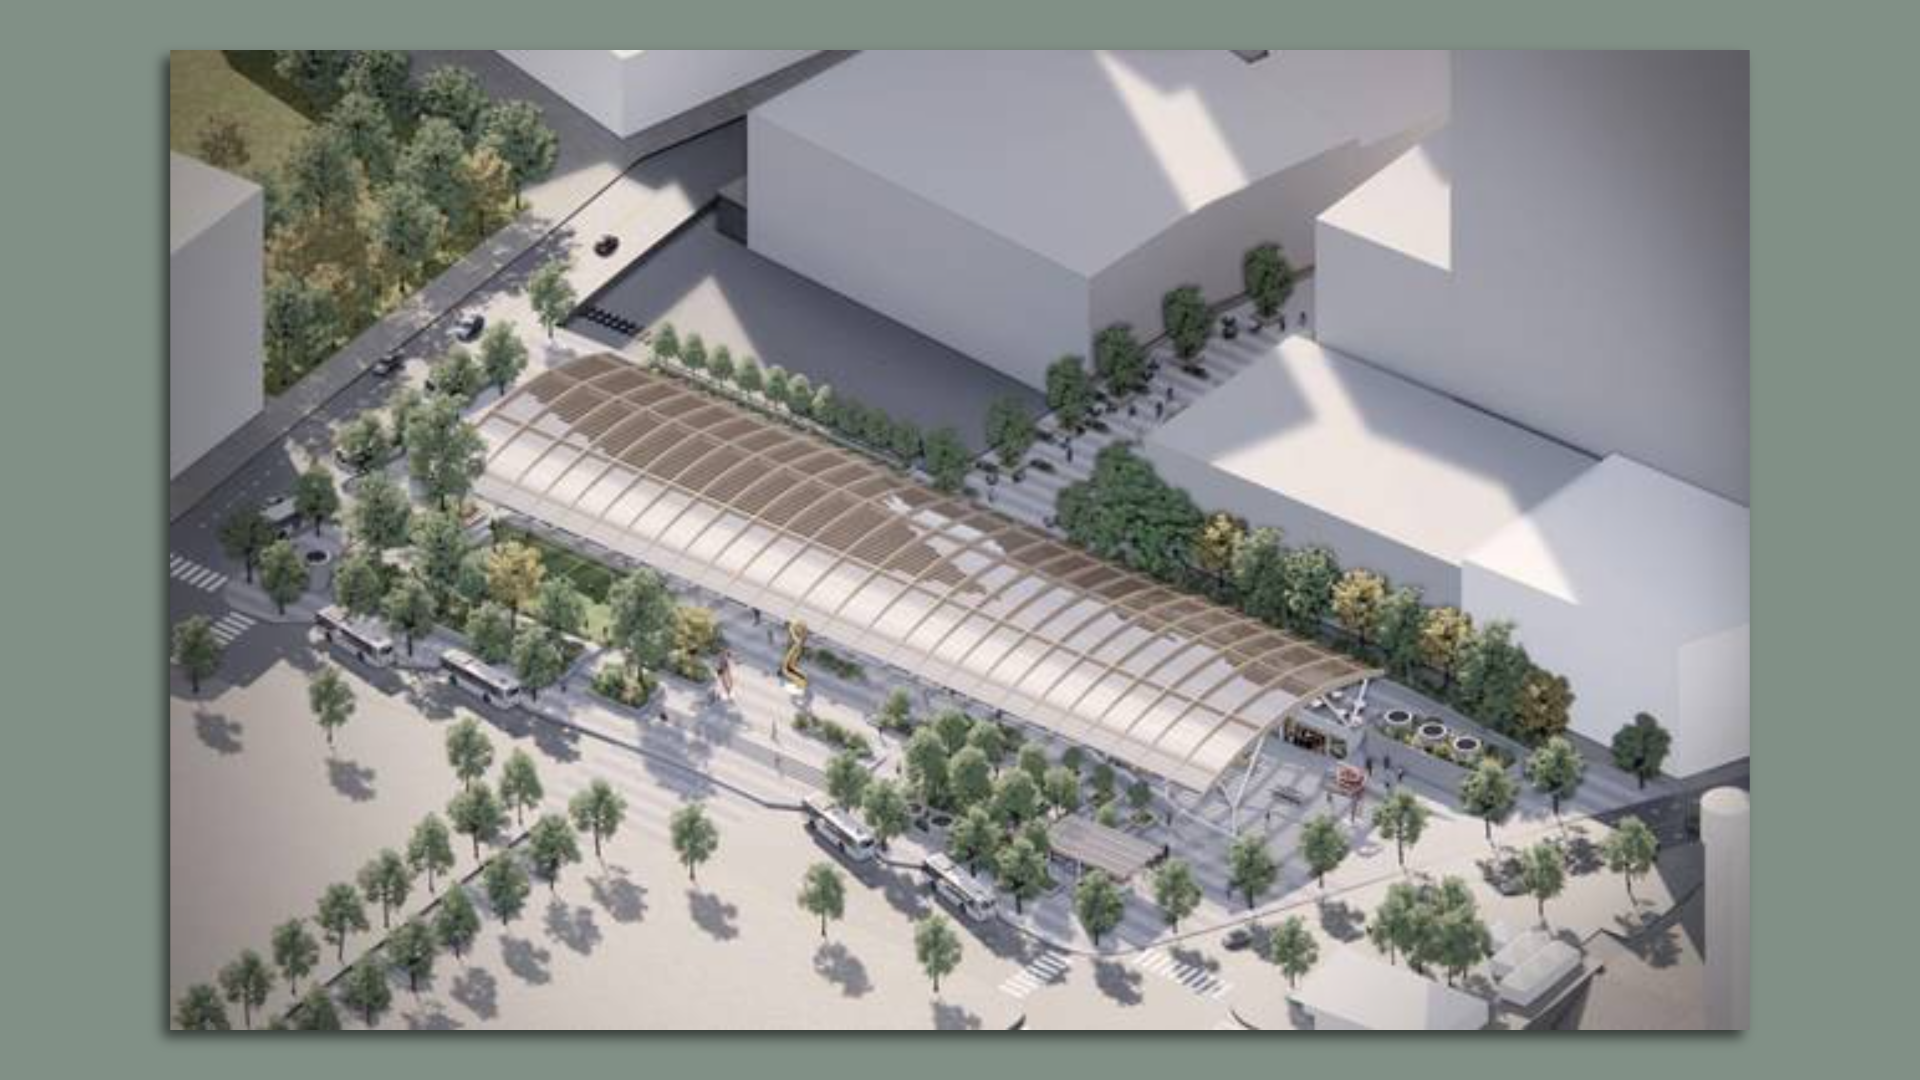 An aerial view rendering of a proposed MARTA station with a glass awning